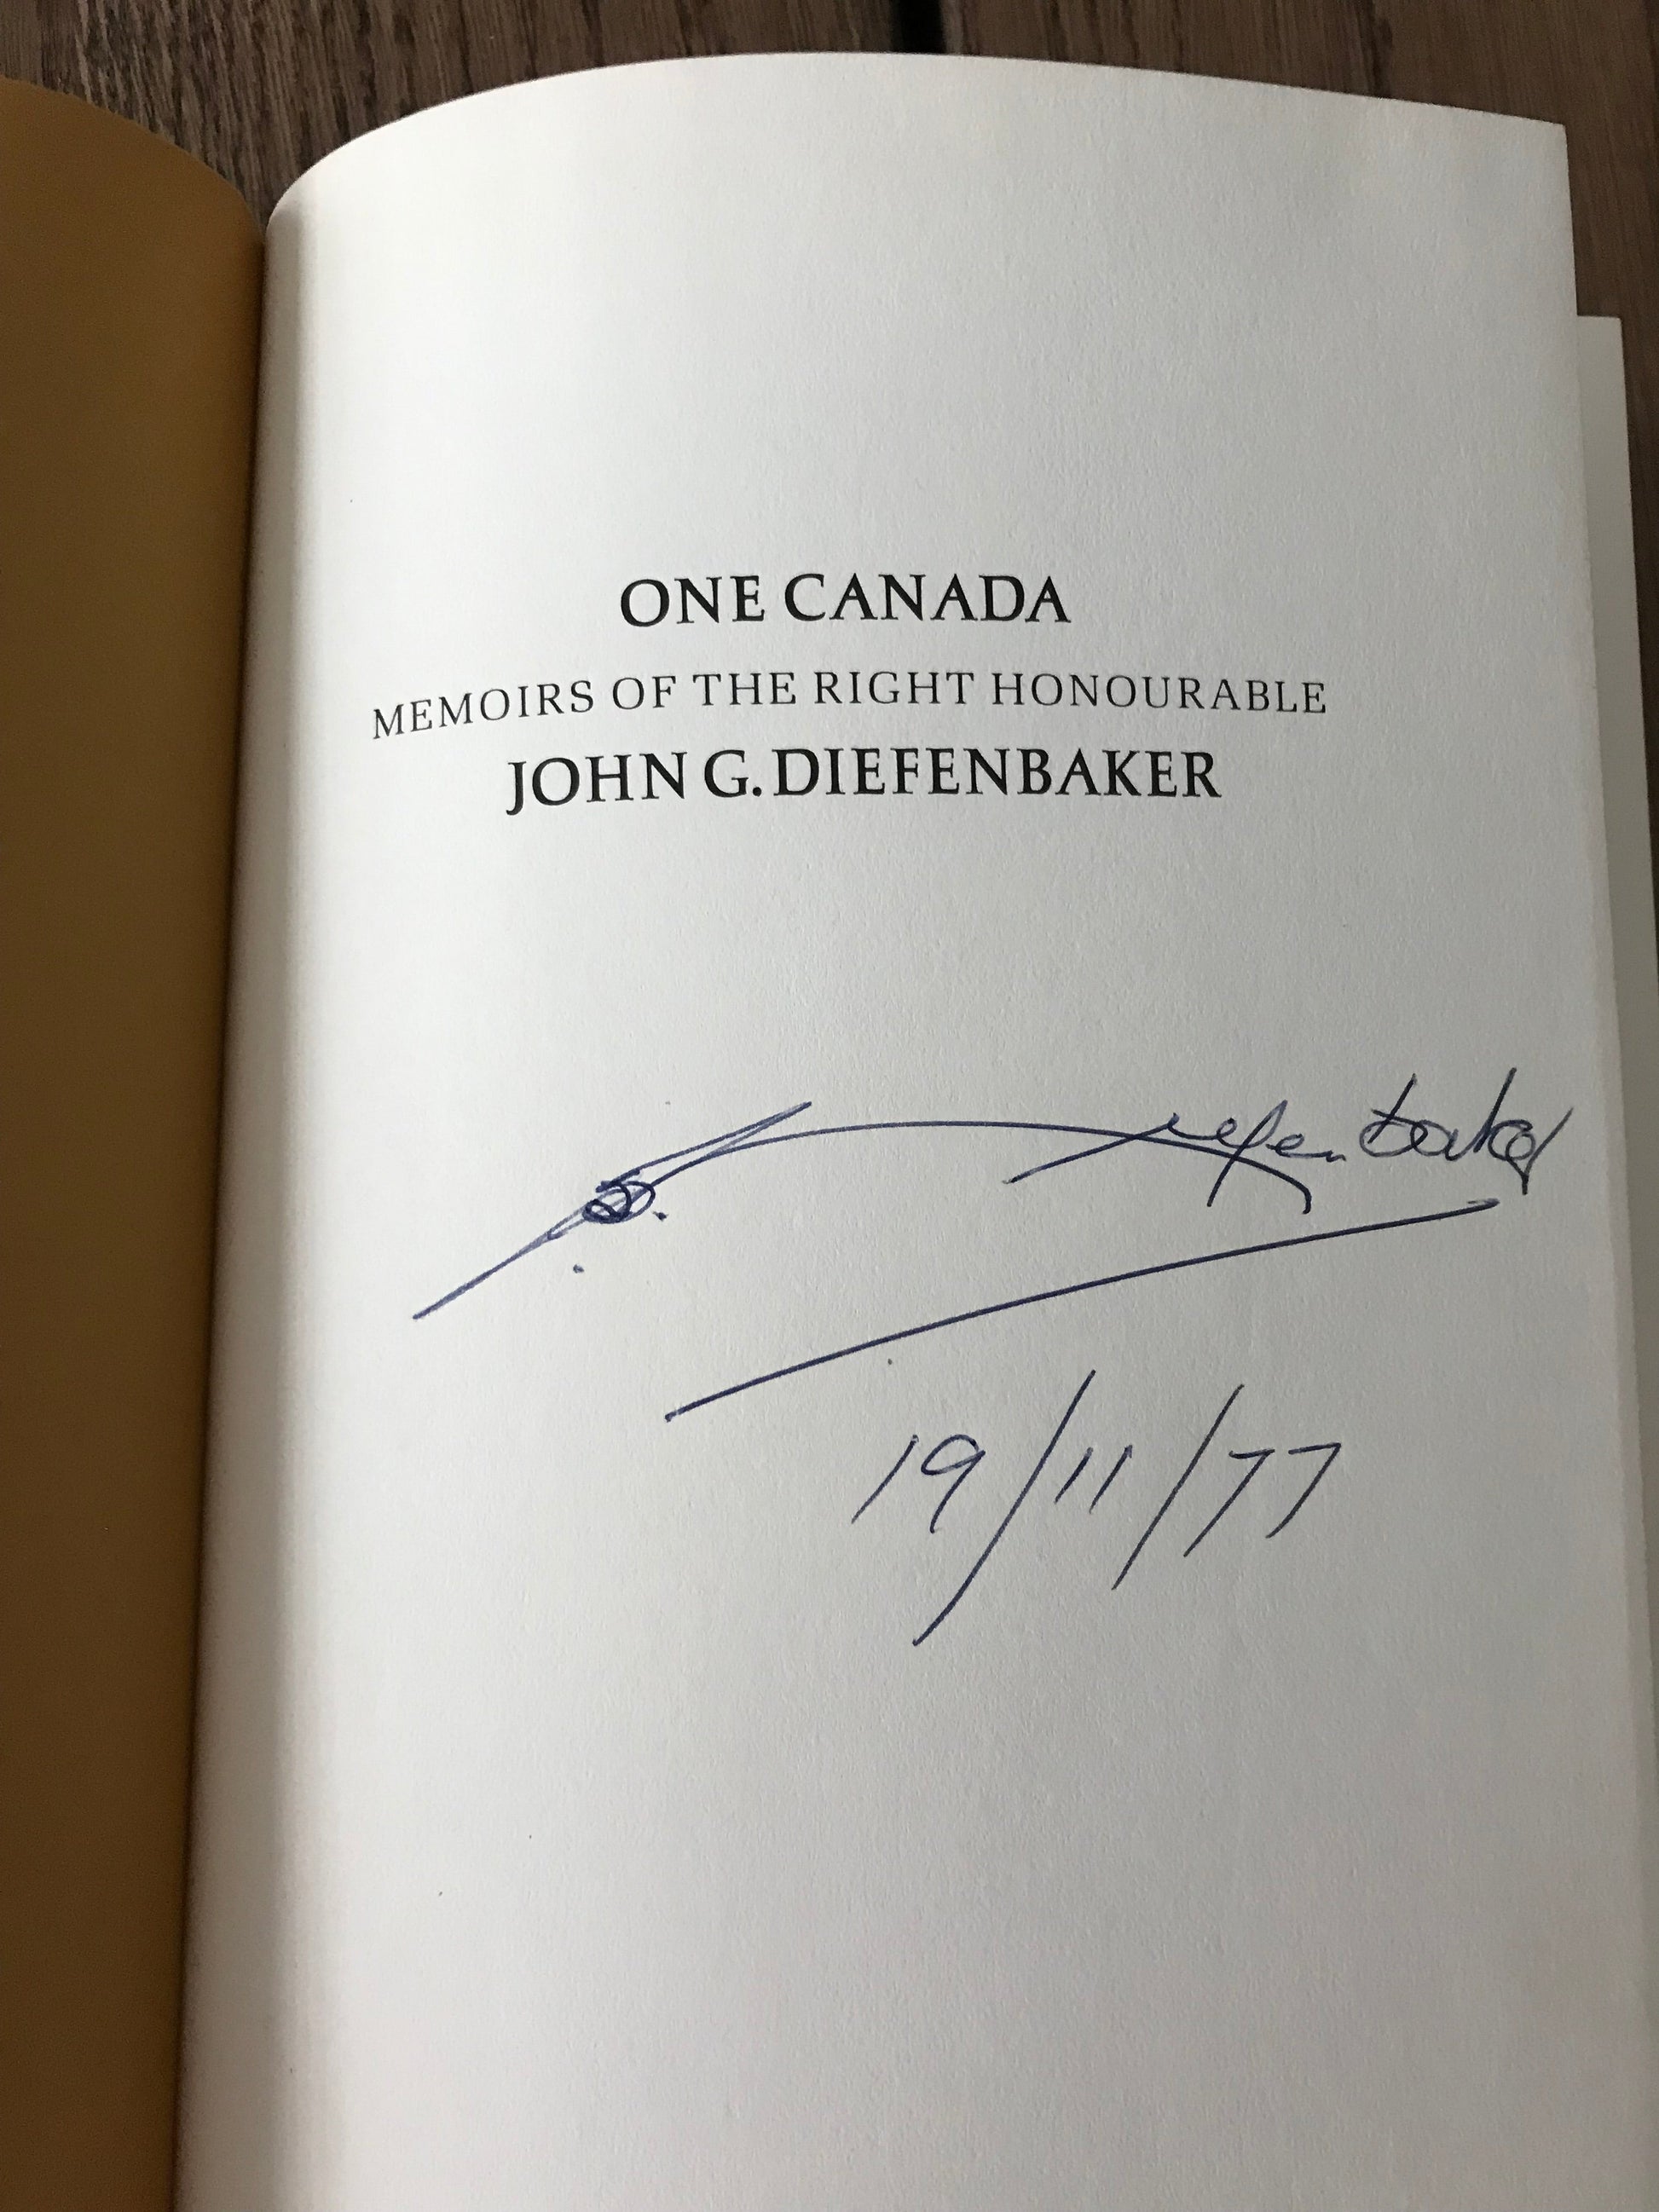 One Canada: The Memoirs of the Right Honourable John G